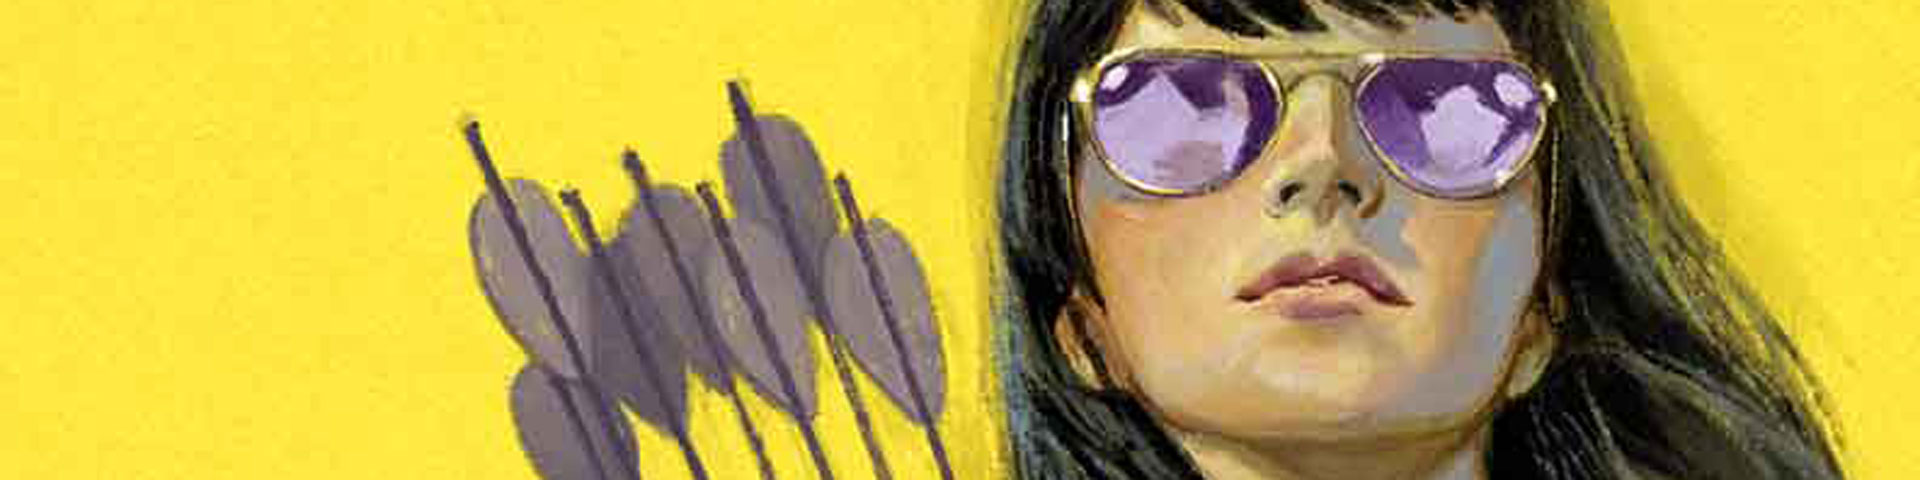 A close-up of Kate Bishop, the other Hawkeye. She's wearing purple sunglasses and the fins of her signature arrows appear to her left.